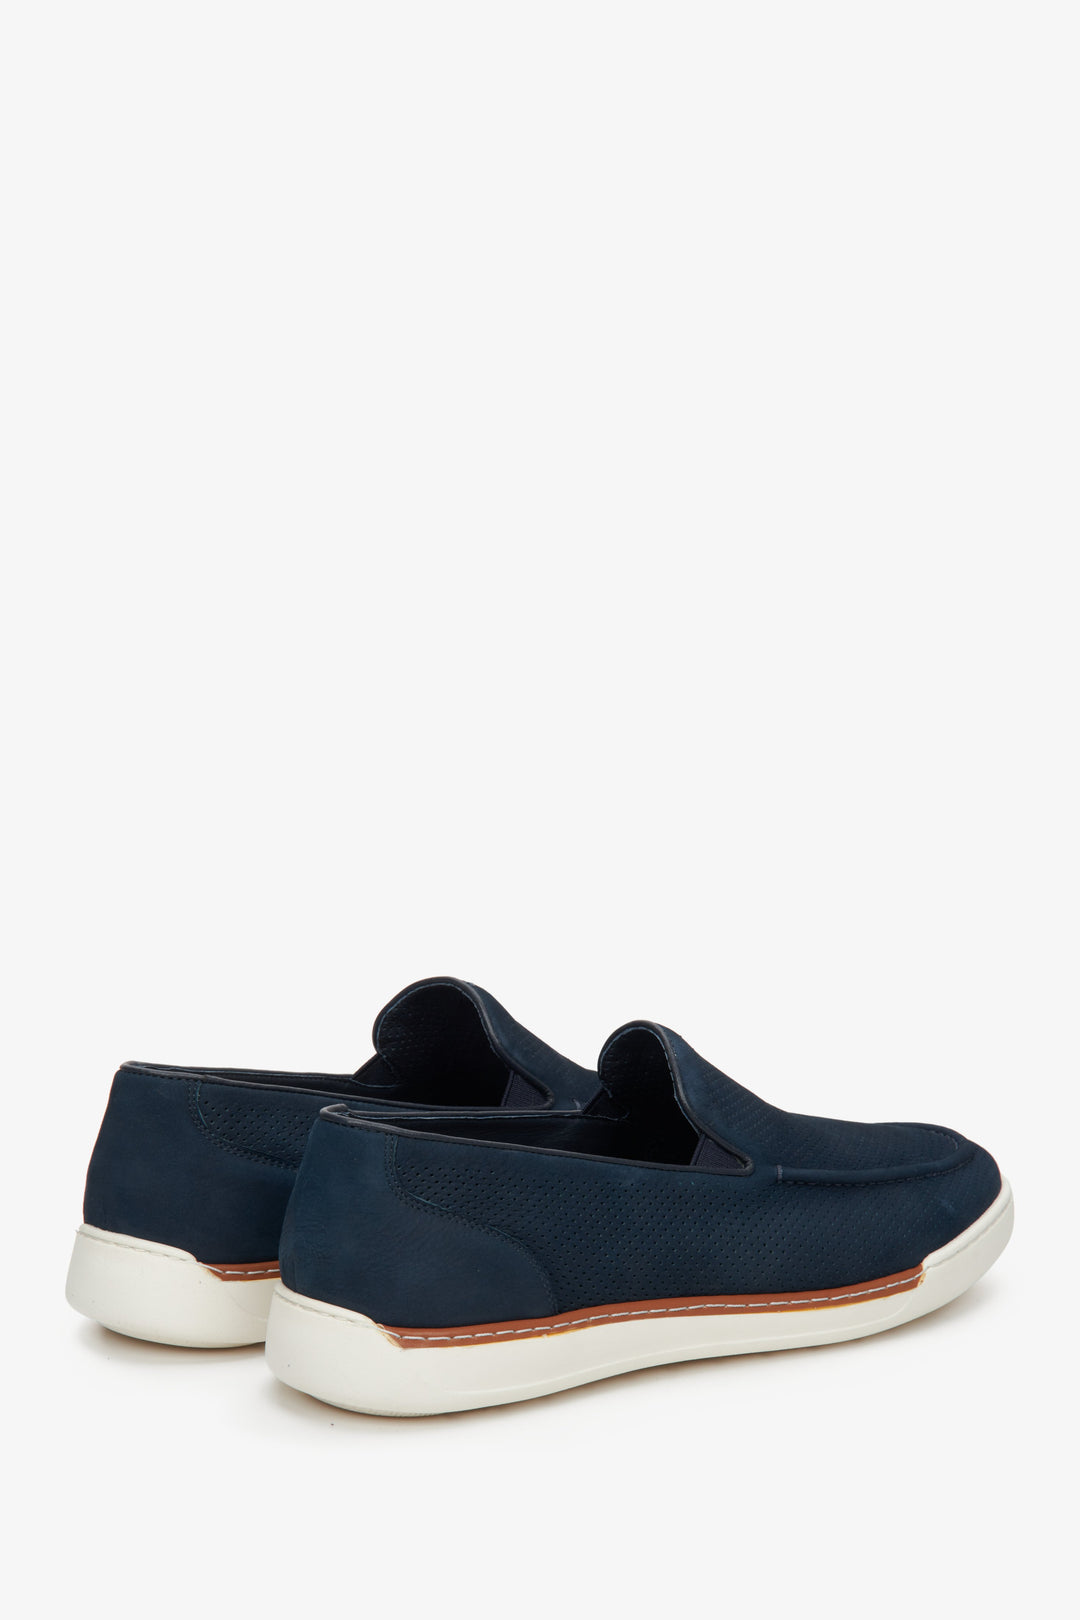 Navy blue nubuck men's moccasins by Estro - presentation of the heel and side seam of the shoes.